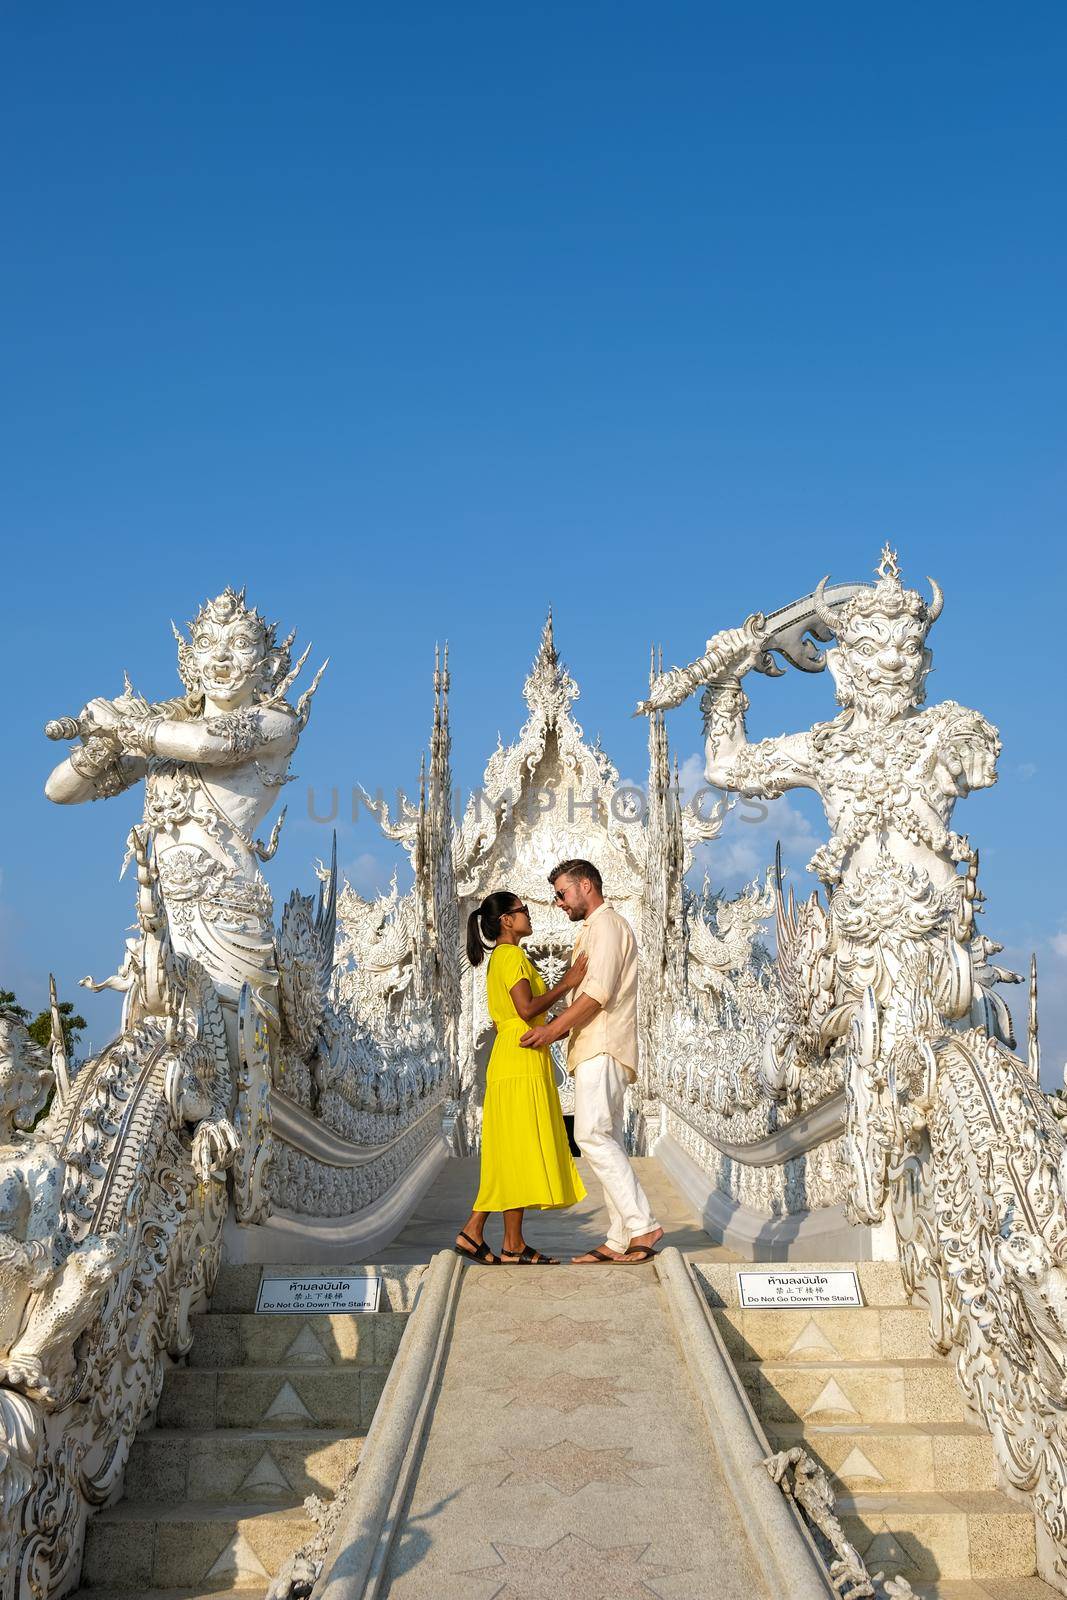 Chiang Rai Thailand, whithe temple Chiangrai during sunset, Wat Rong Khun, aka The White Temple, in Chiang Rai, Thailand. Panorama white tempple Thaialnd by fokkebok